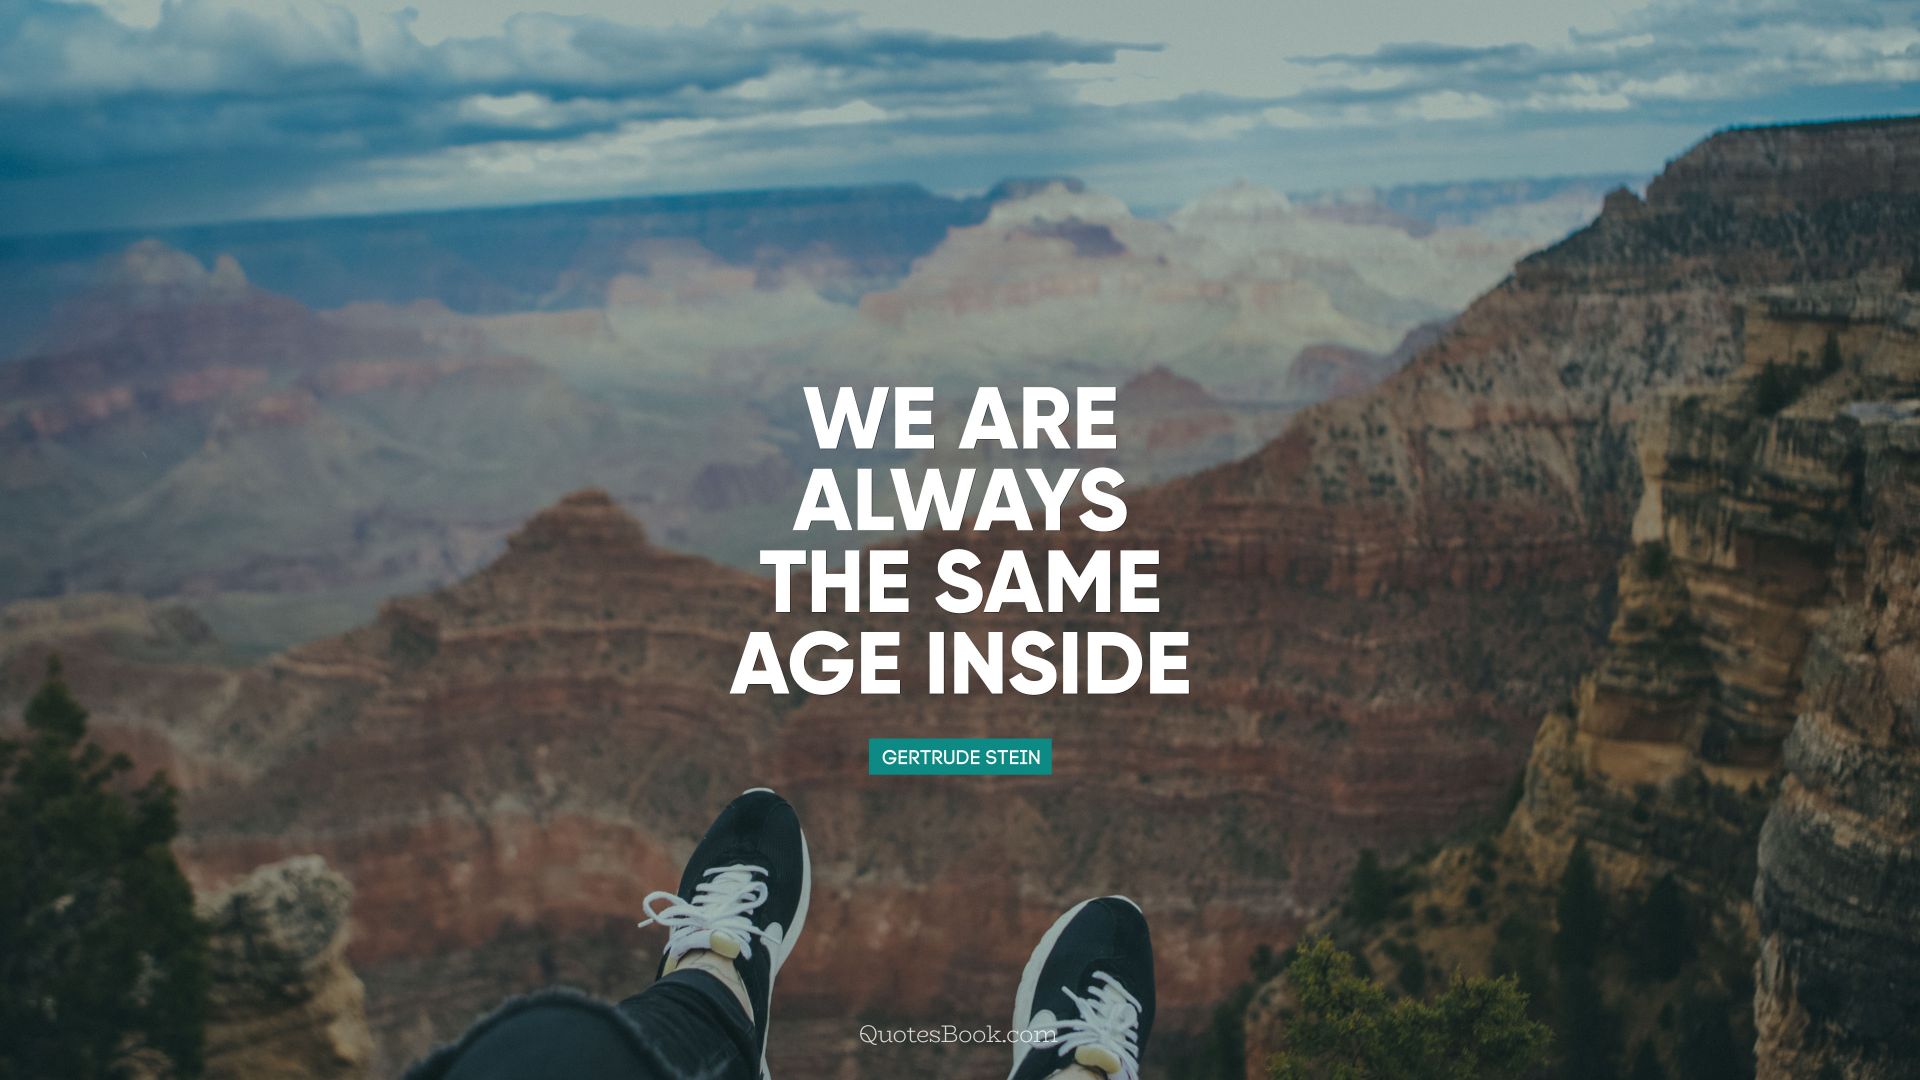 We are always the same age inside